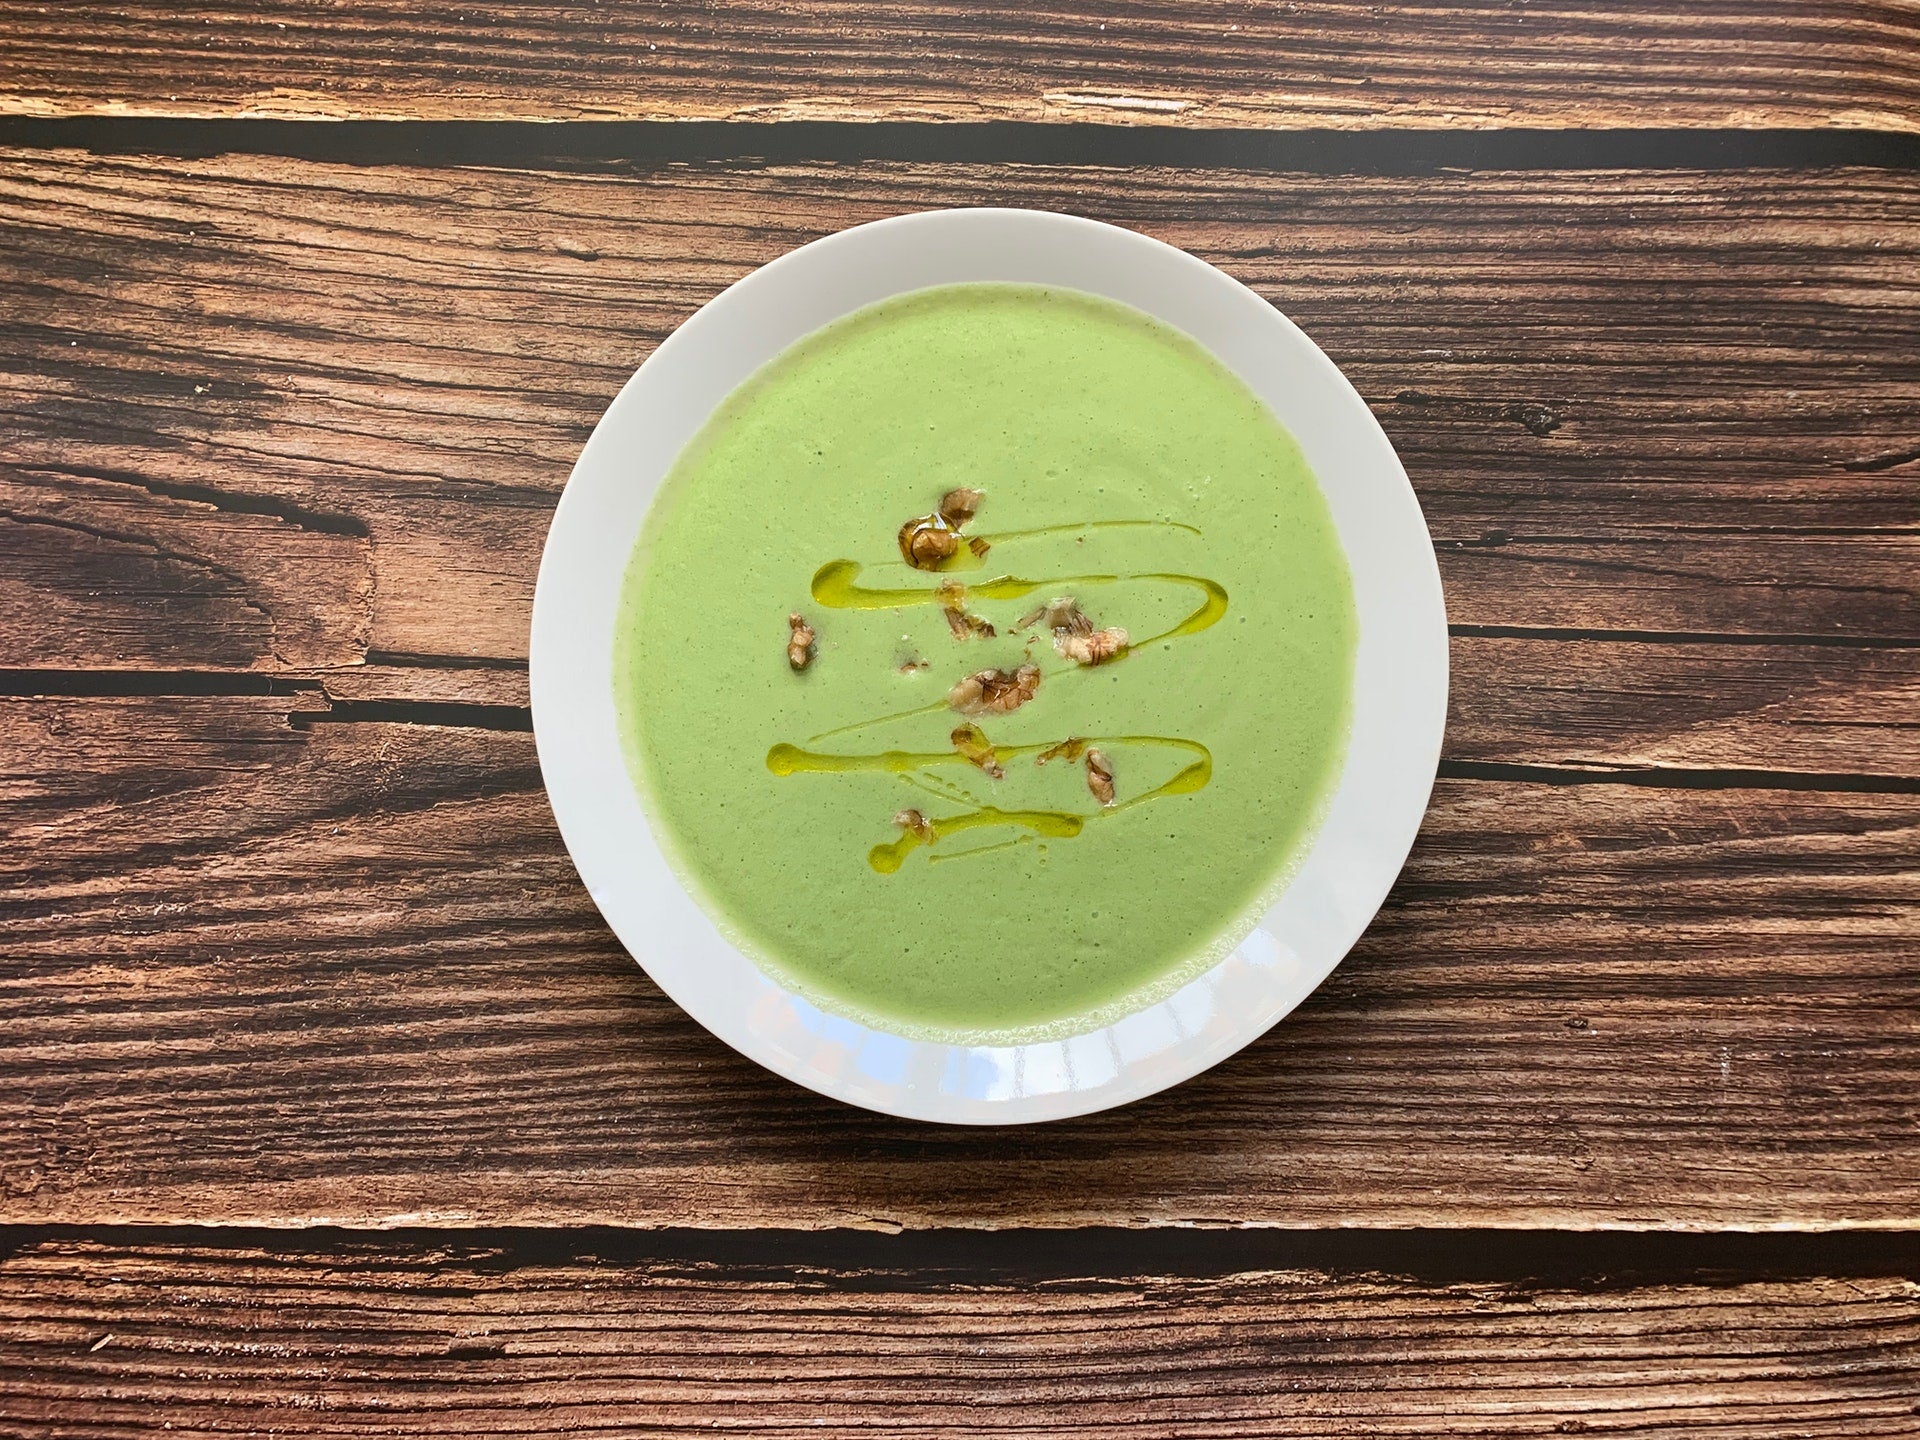 Pineapple avocado gazpacho is a nutrient-packed, healthy recipe that you can make without compromising on taste.